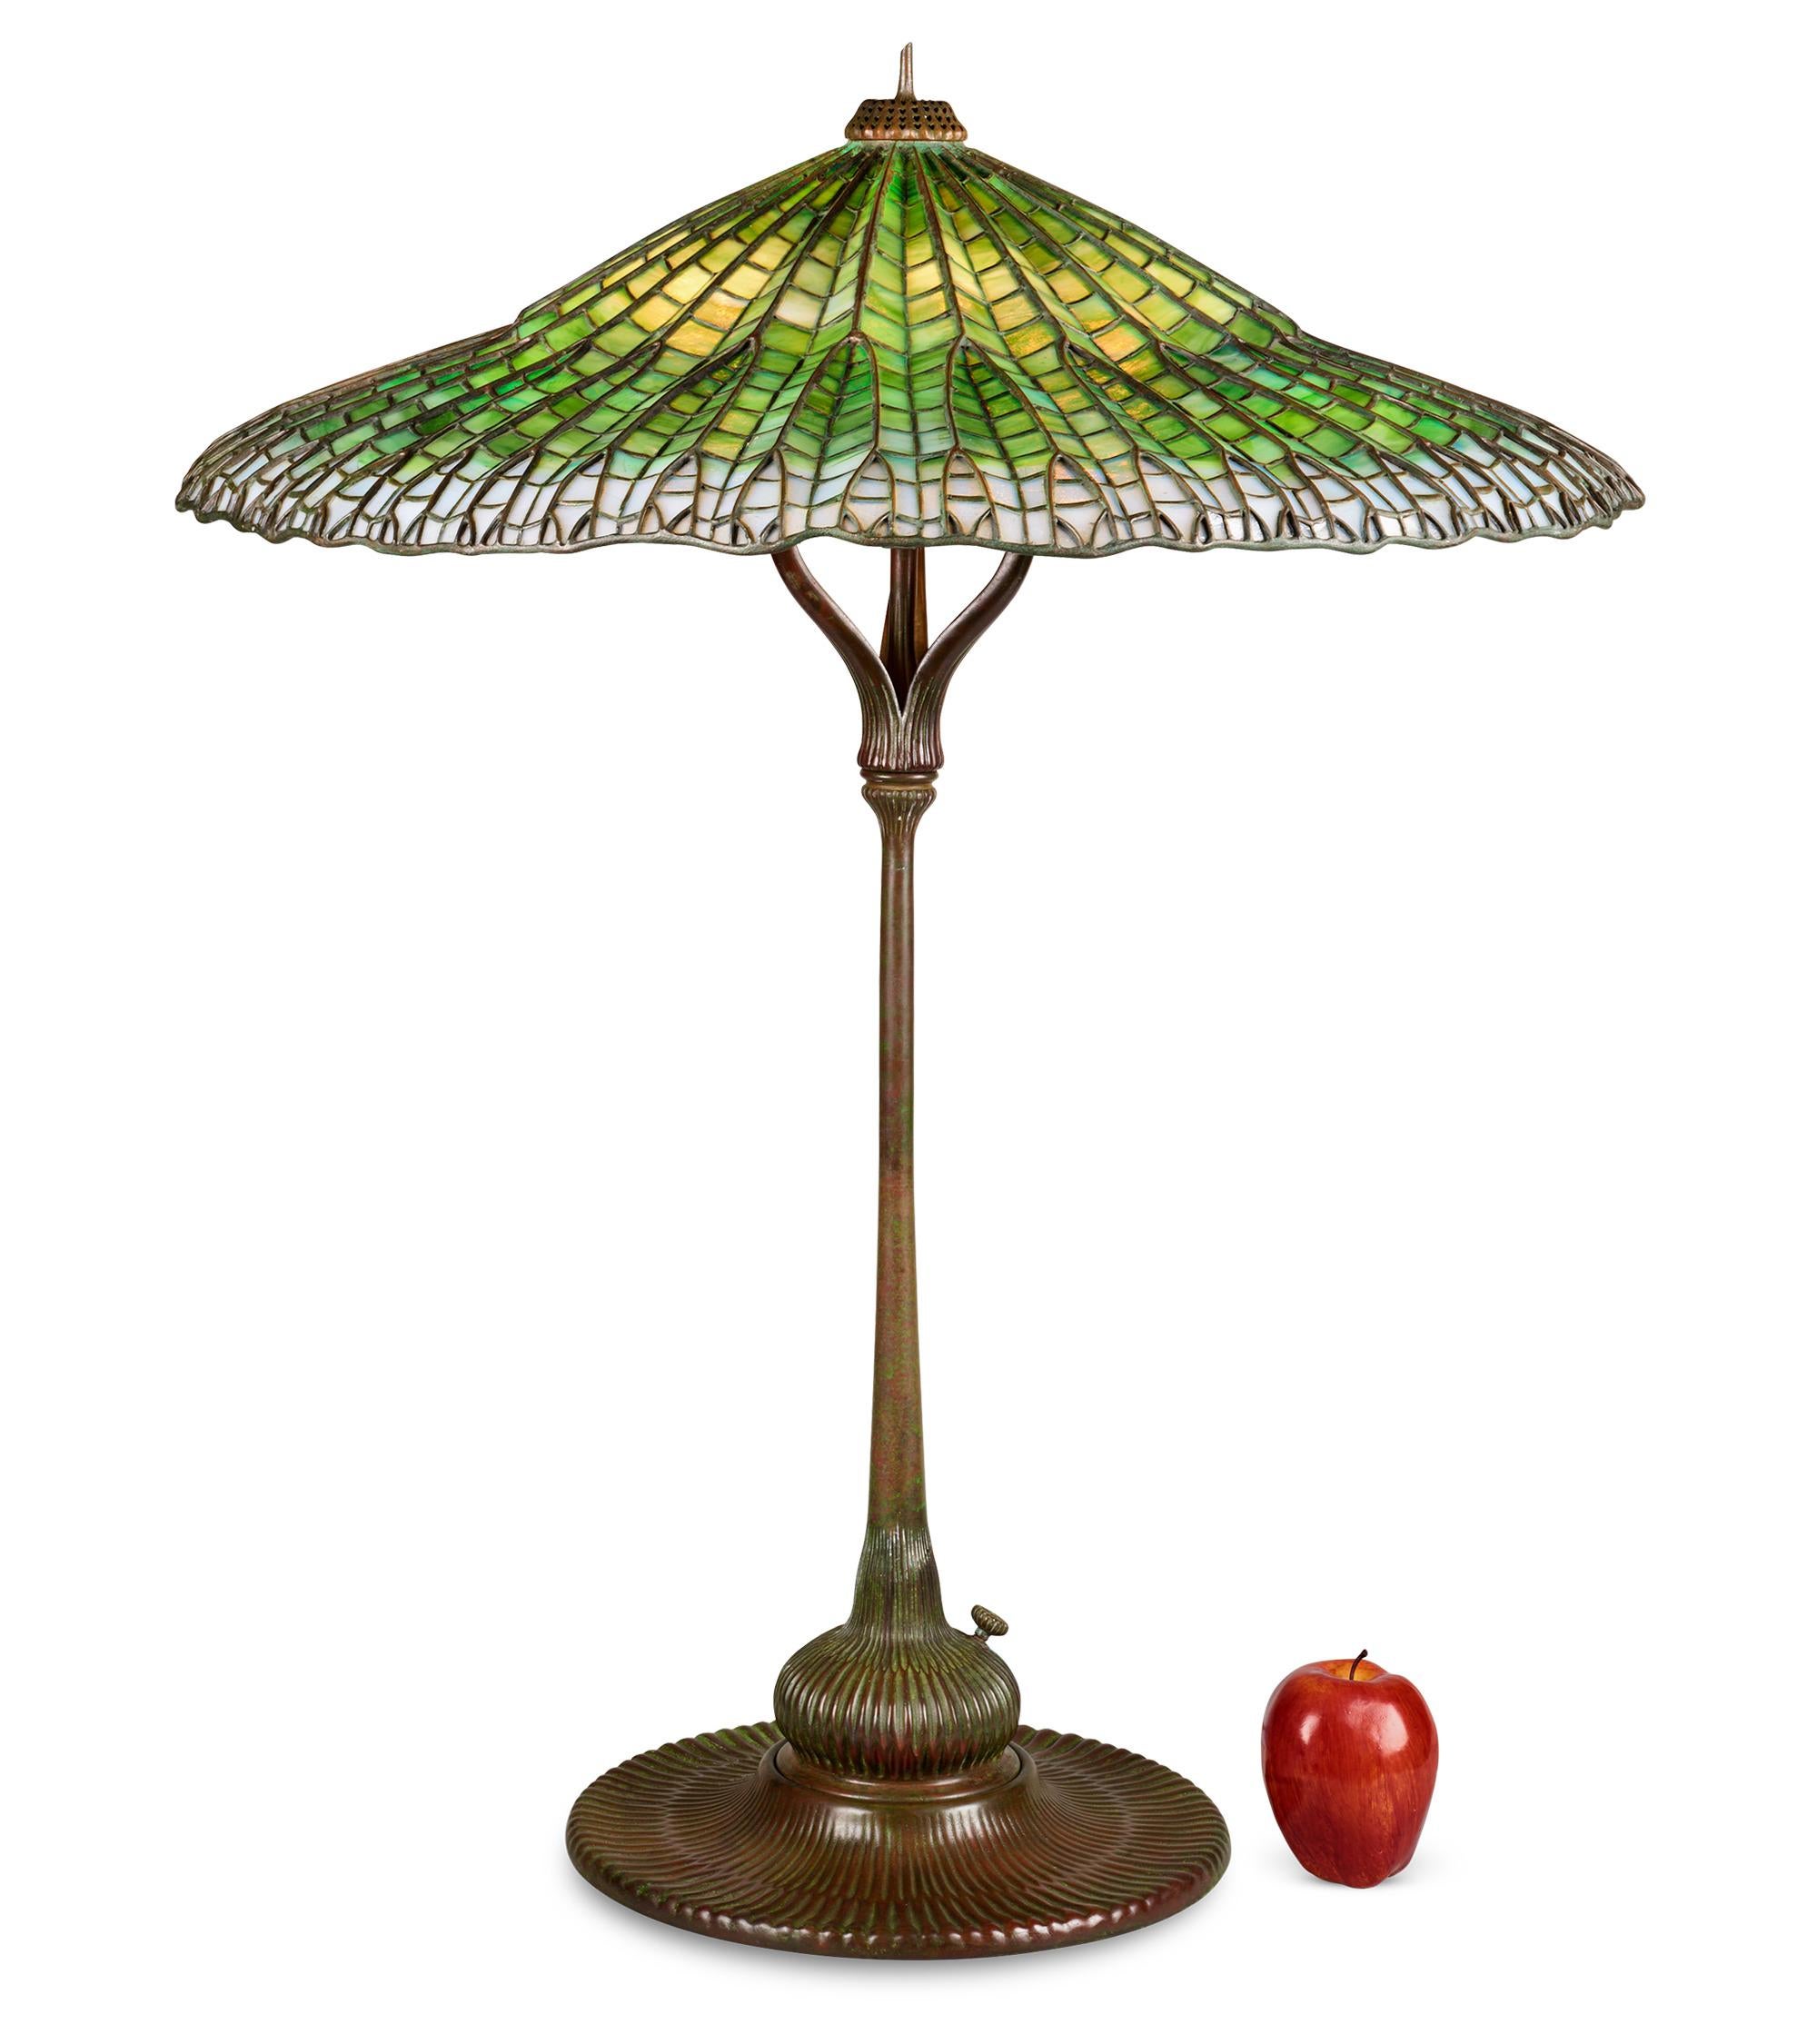 Tiffany Studios Lotus Pagoda Lamp In Excellent Condition For Sale In New Orleans, LA